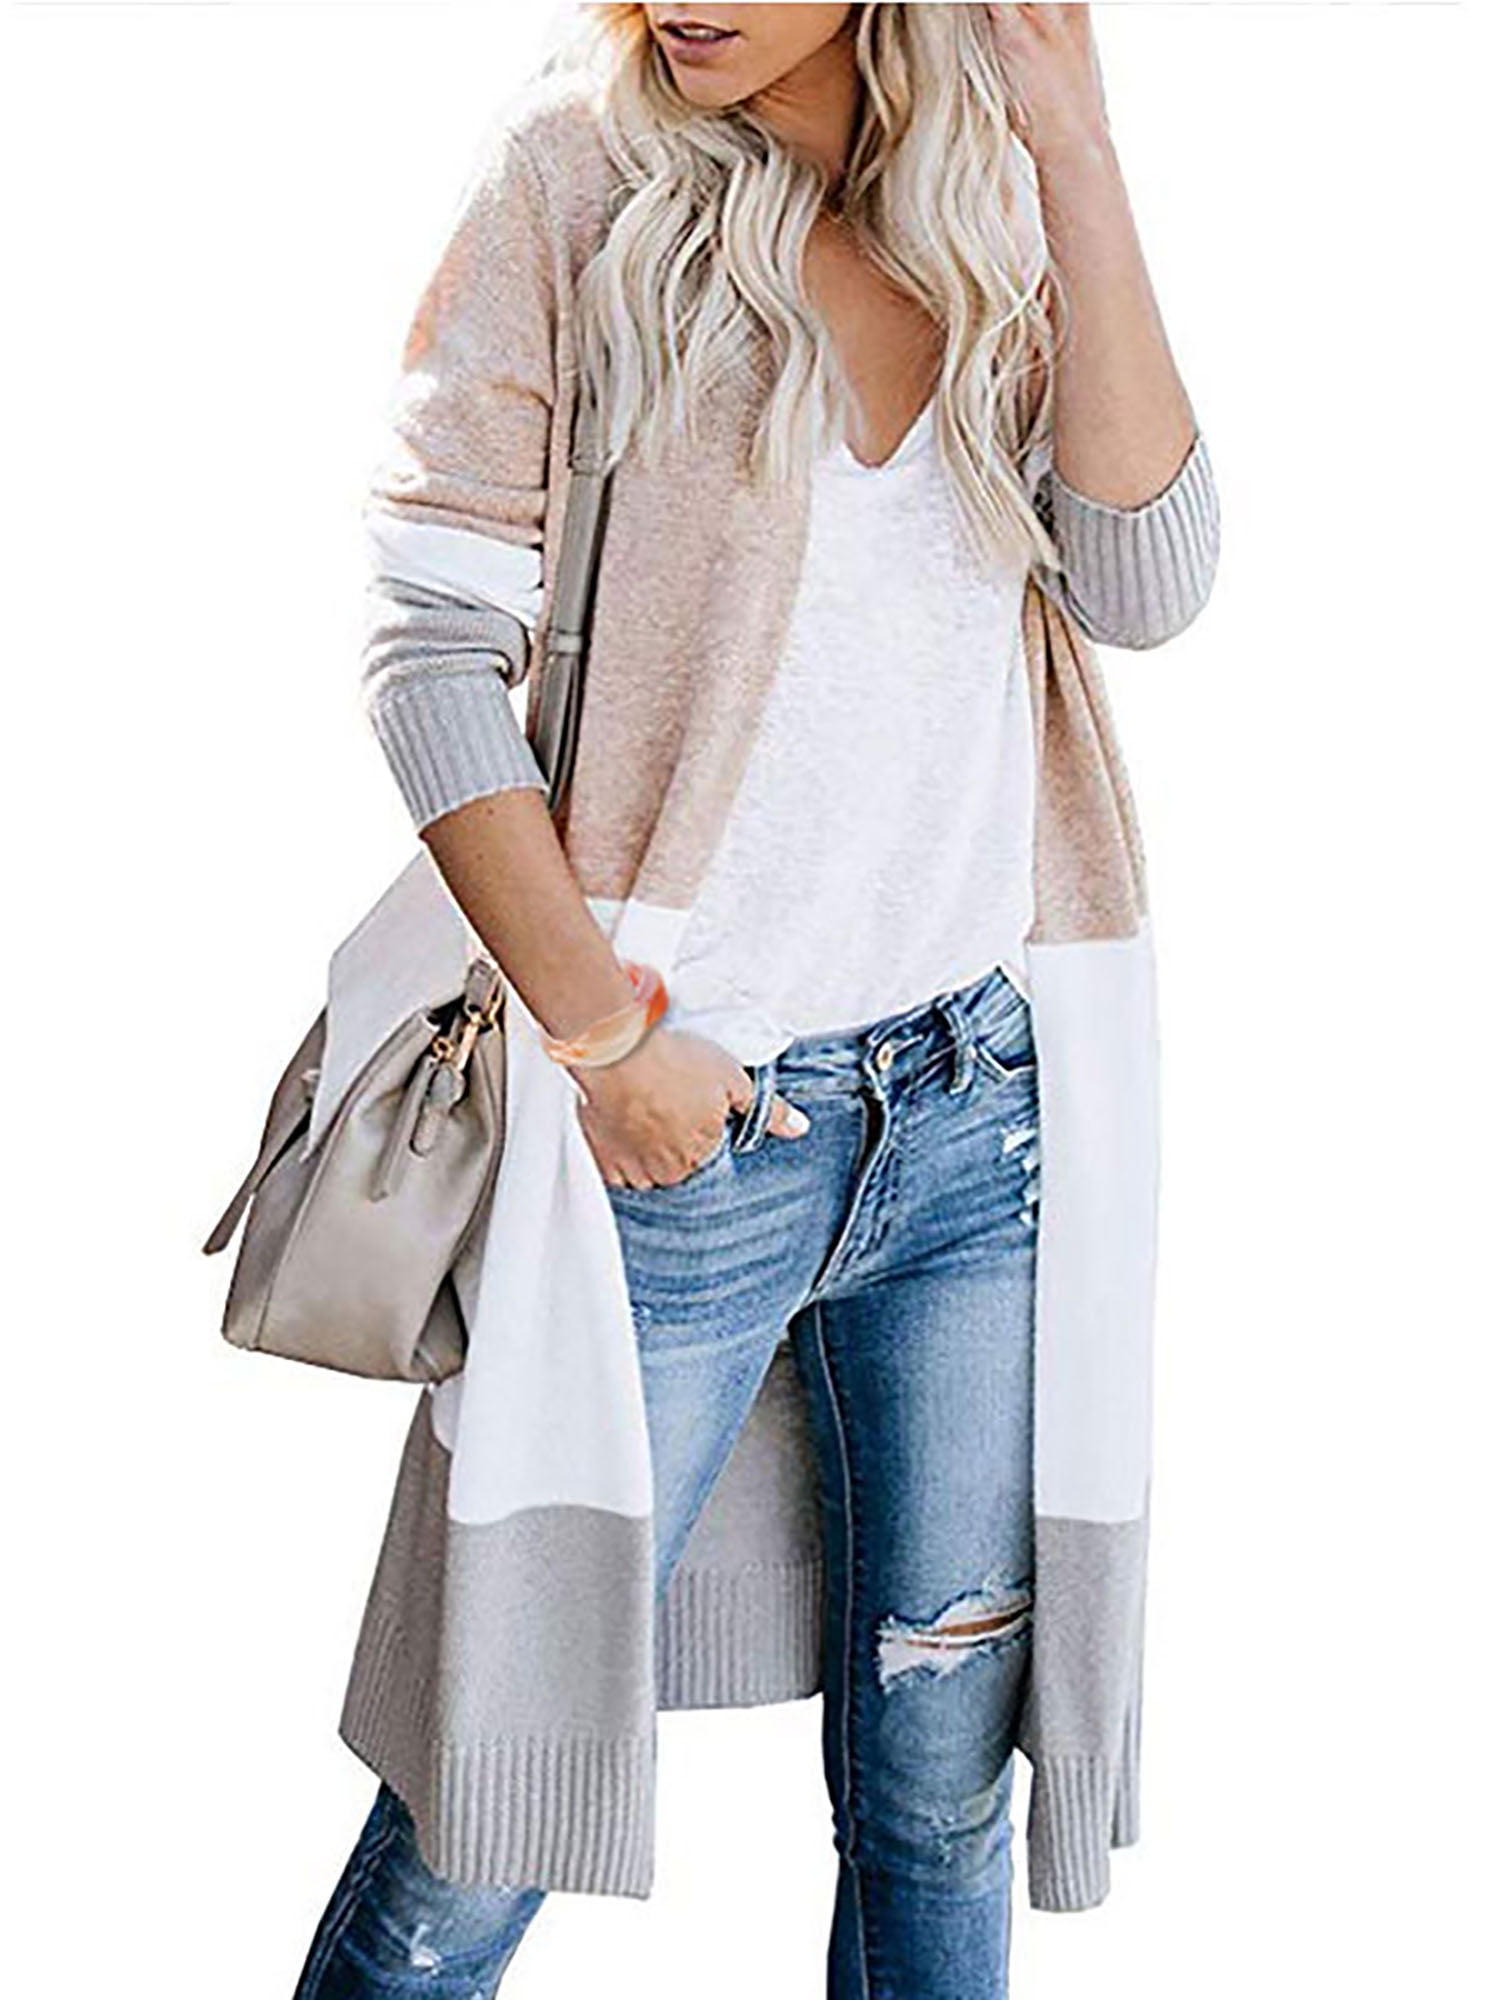 Womens Striped Cardigan Long Sleeve Open Front Tops Lightweight Loose Sweatshirts Plus Size Duster Coat Fall Outwear Casual Suit 